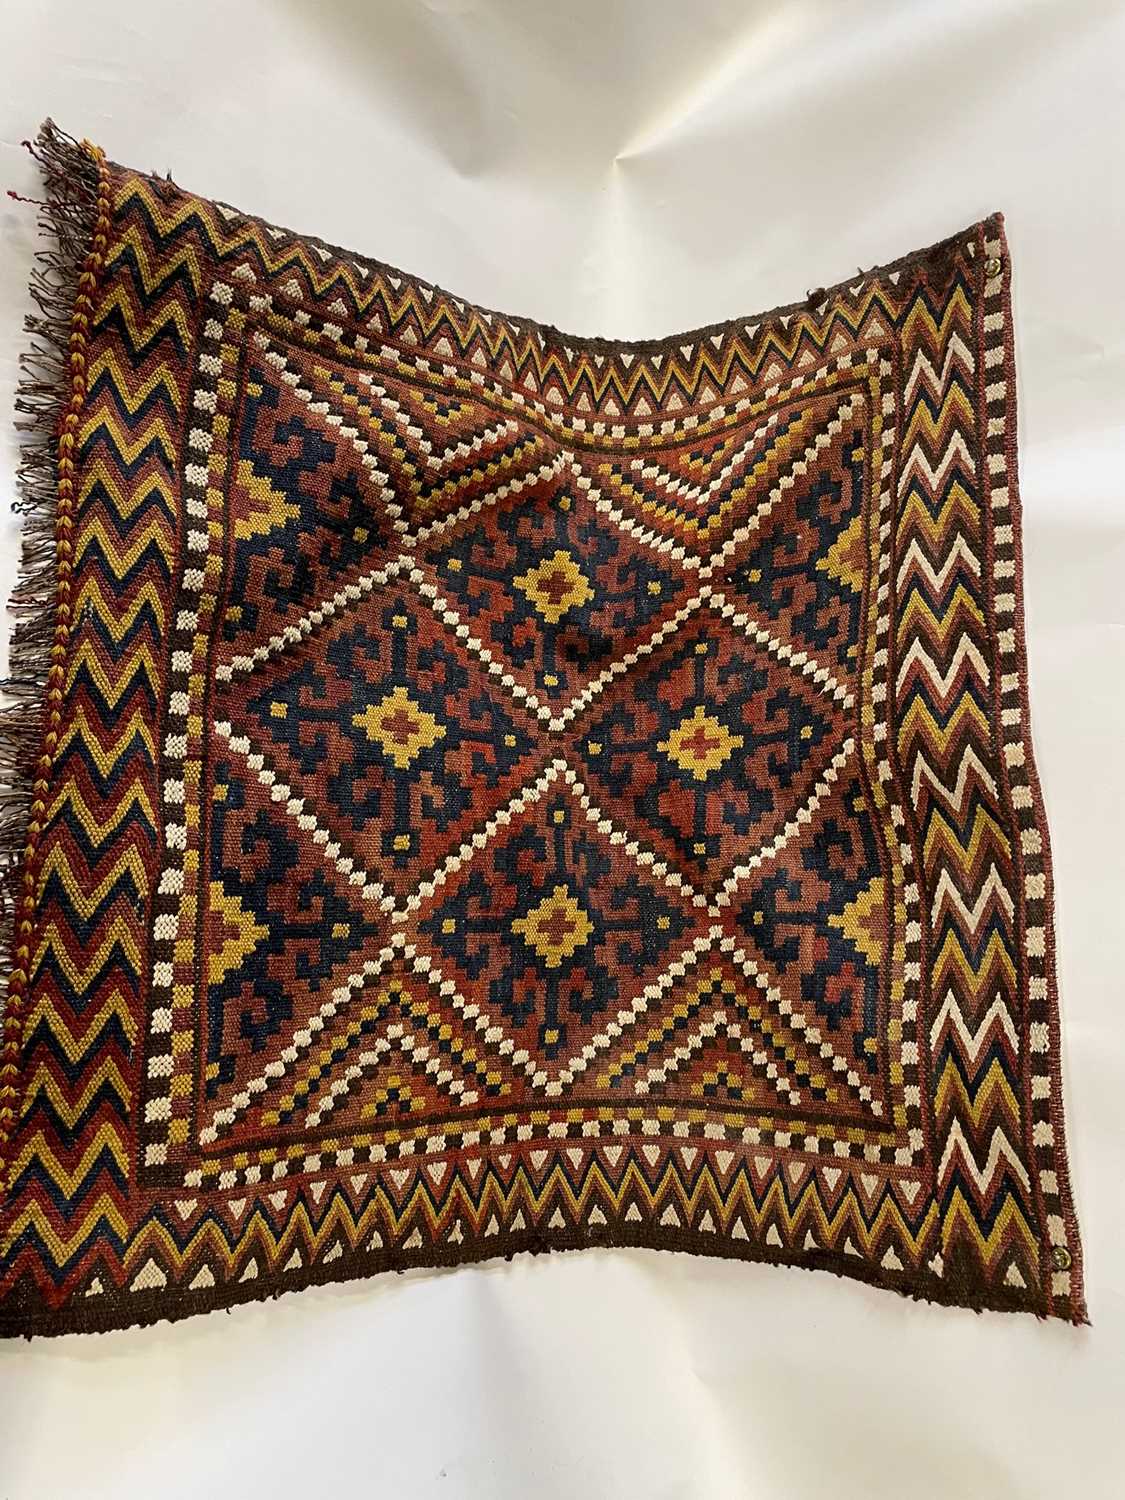 Small Middle Eastern flat weave rug or wall hanging, approx 80 x 75 cm